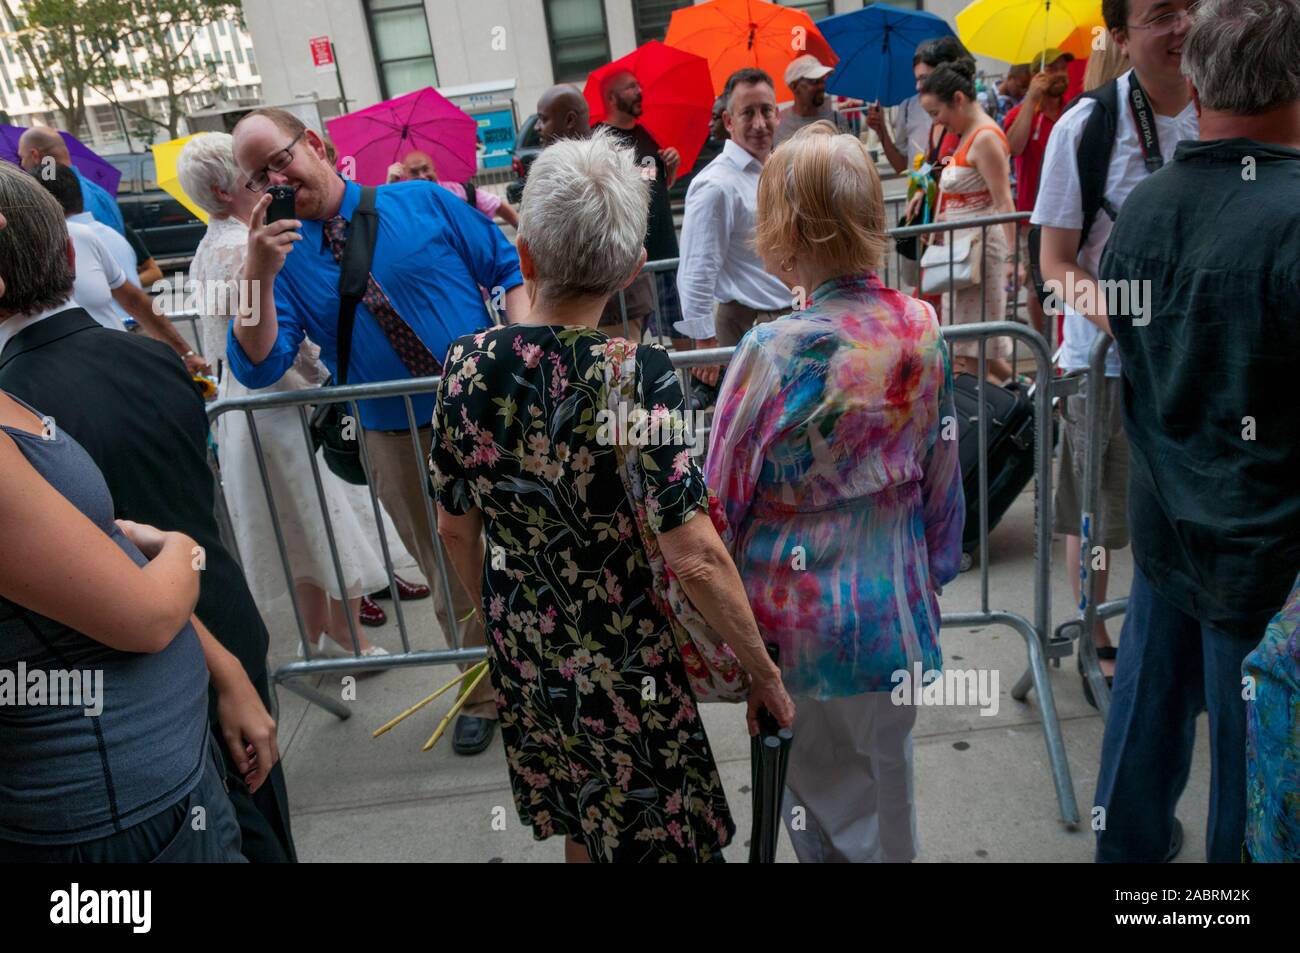 A lesbian couple waits in line outside the Manhattan City Clerk's office on the first day of legal same-sex marriage in New York State, USA. Stock Photo